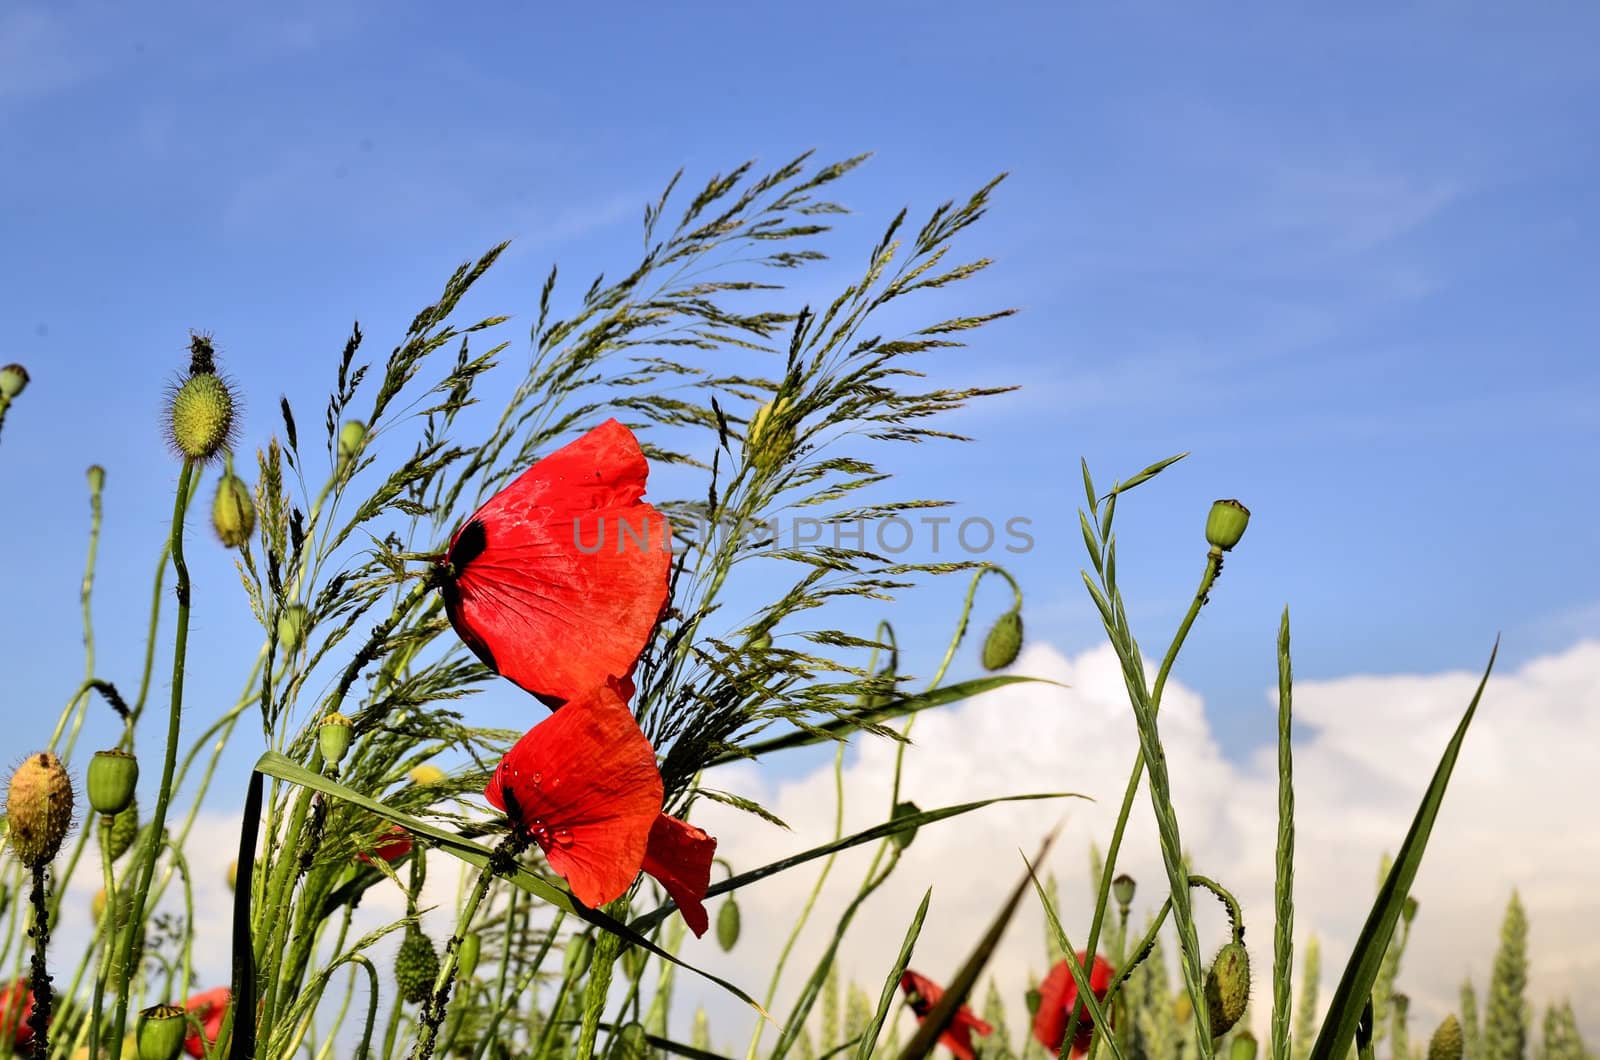 Photo shows a bouquet of poppies and wild plants against a blue sky on a hot summer day.